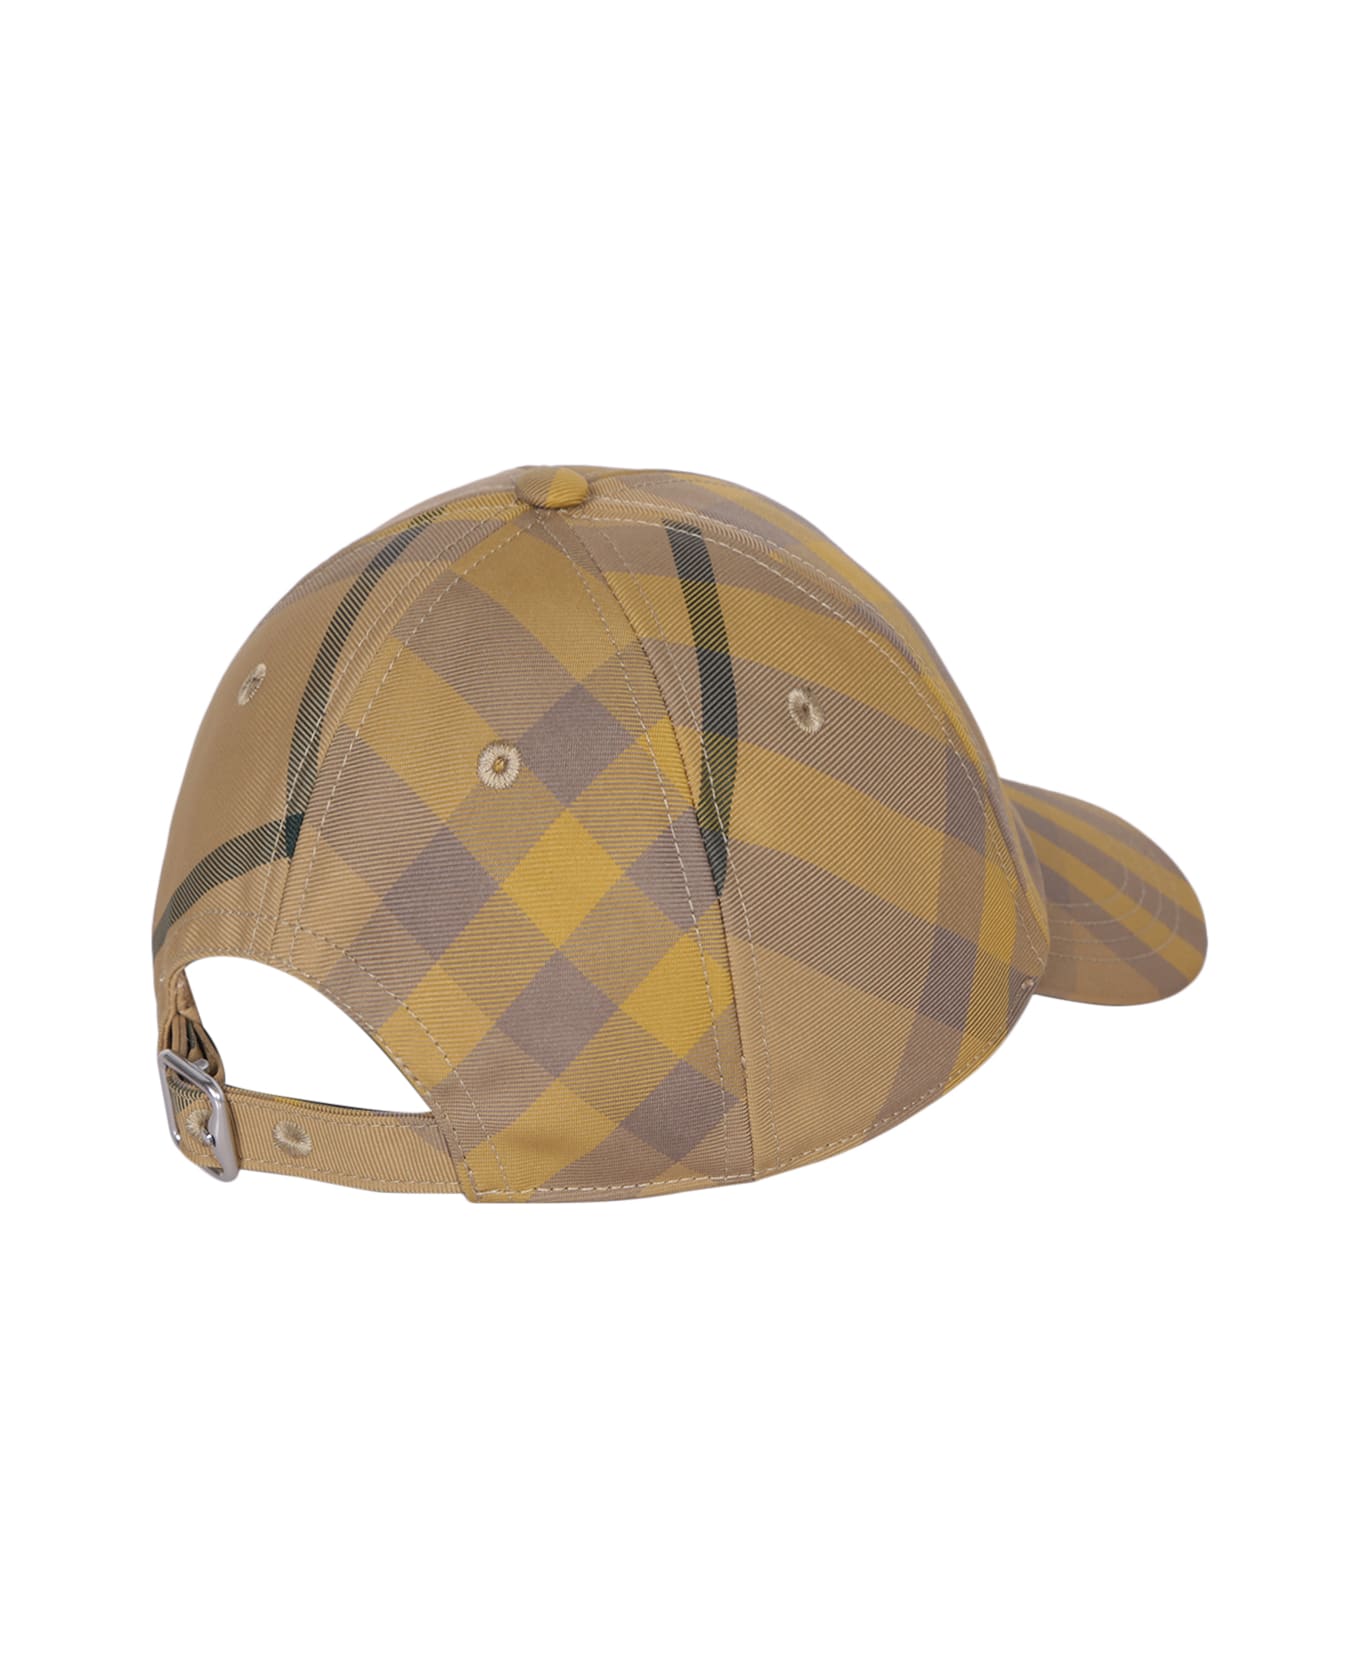 Burberry Bias CAMOUFLAGE Hat - Yellow